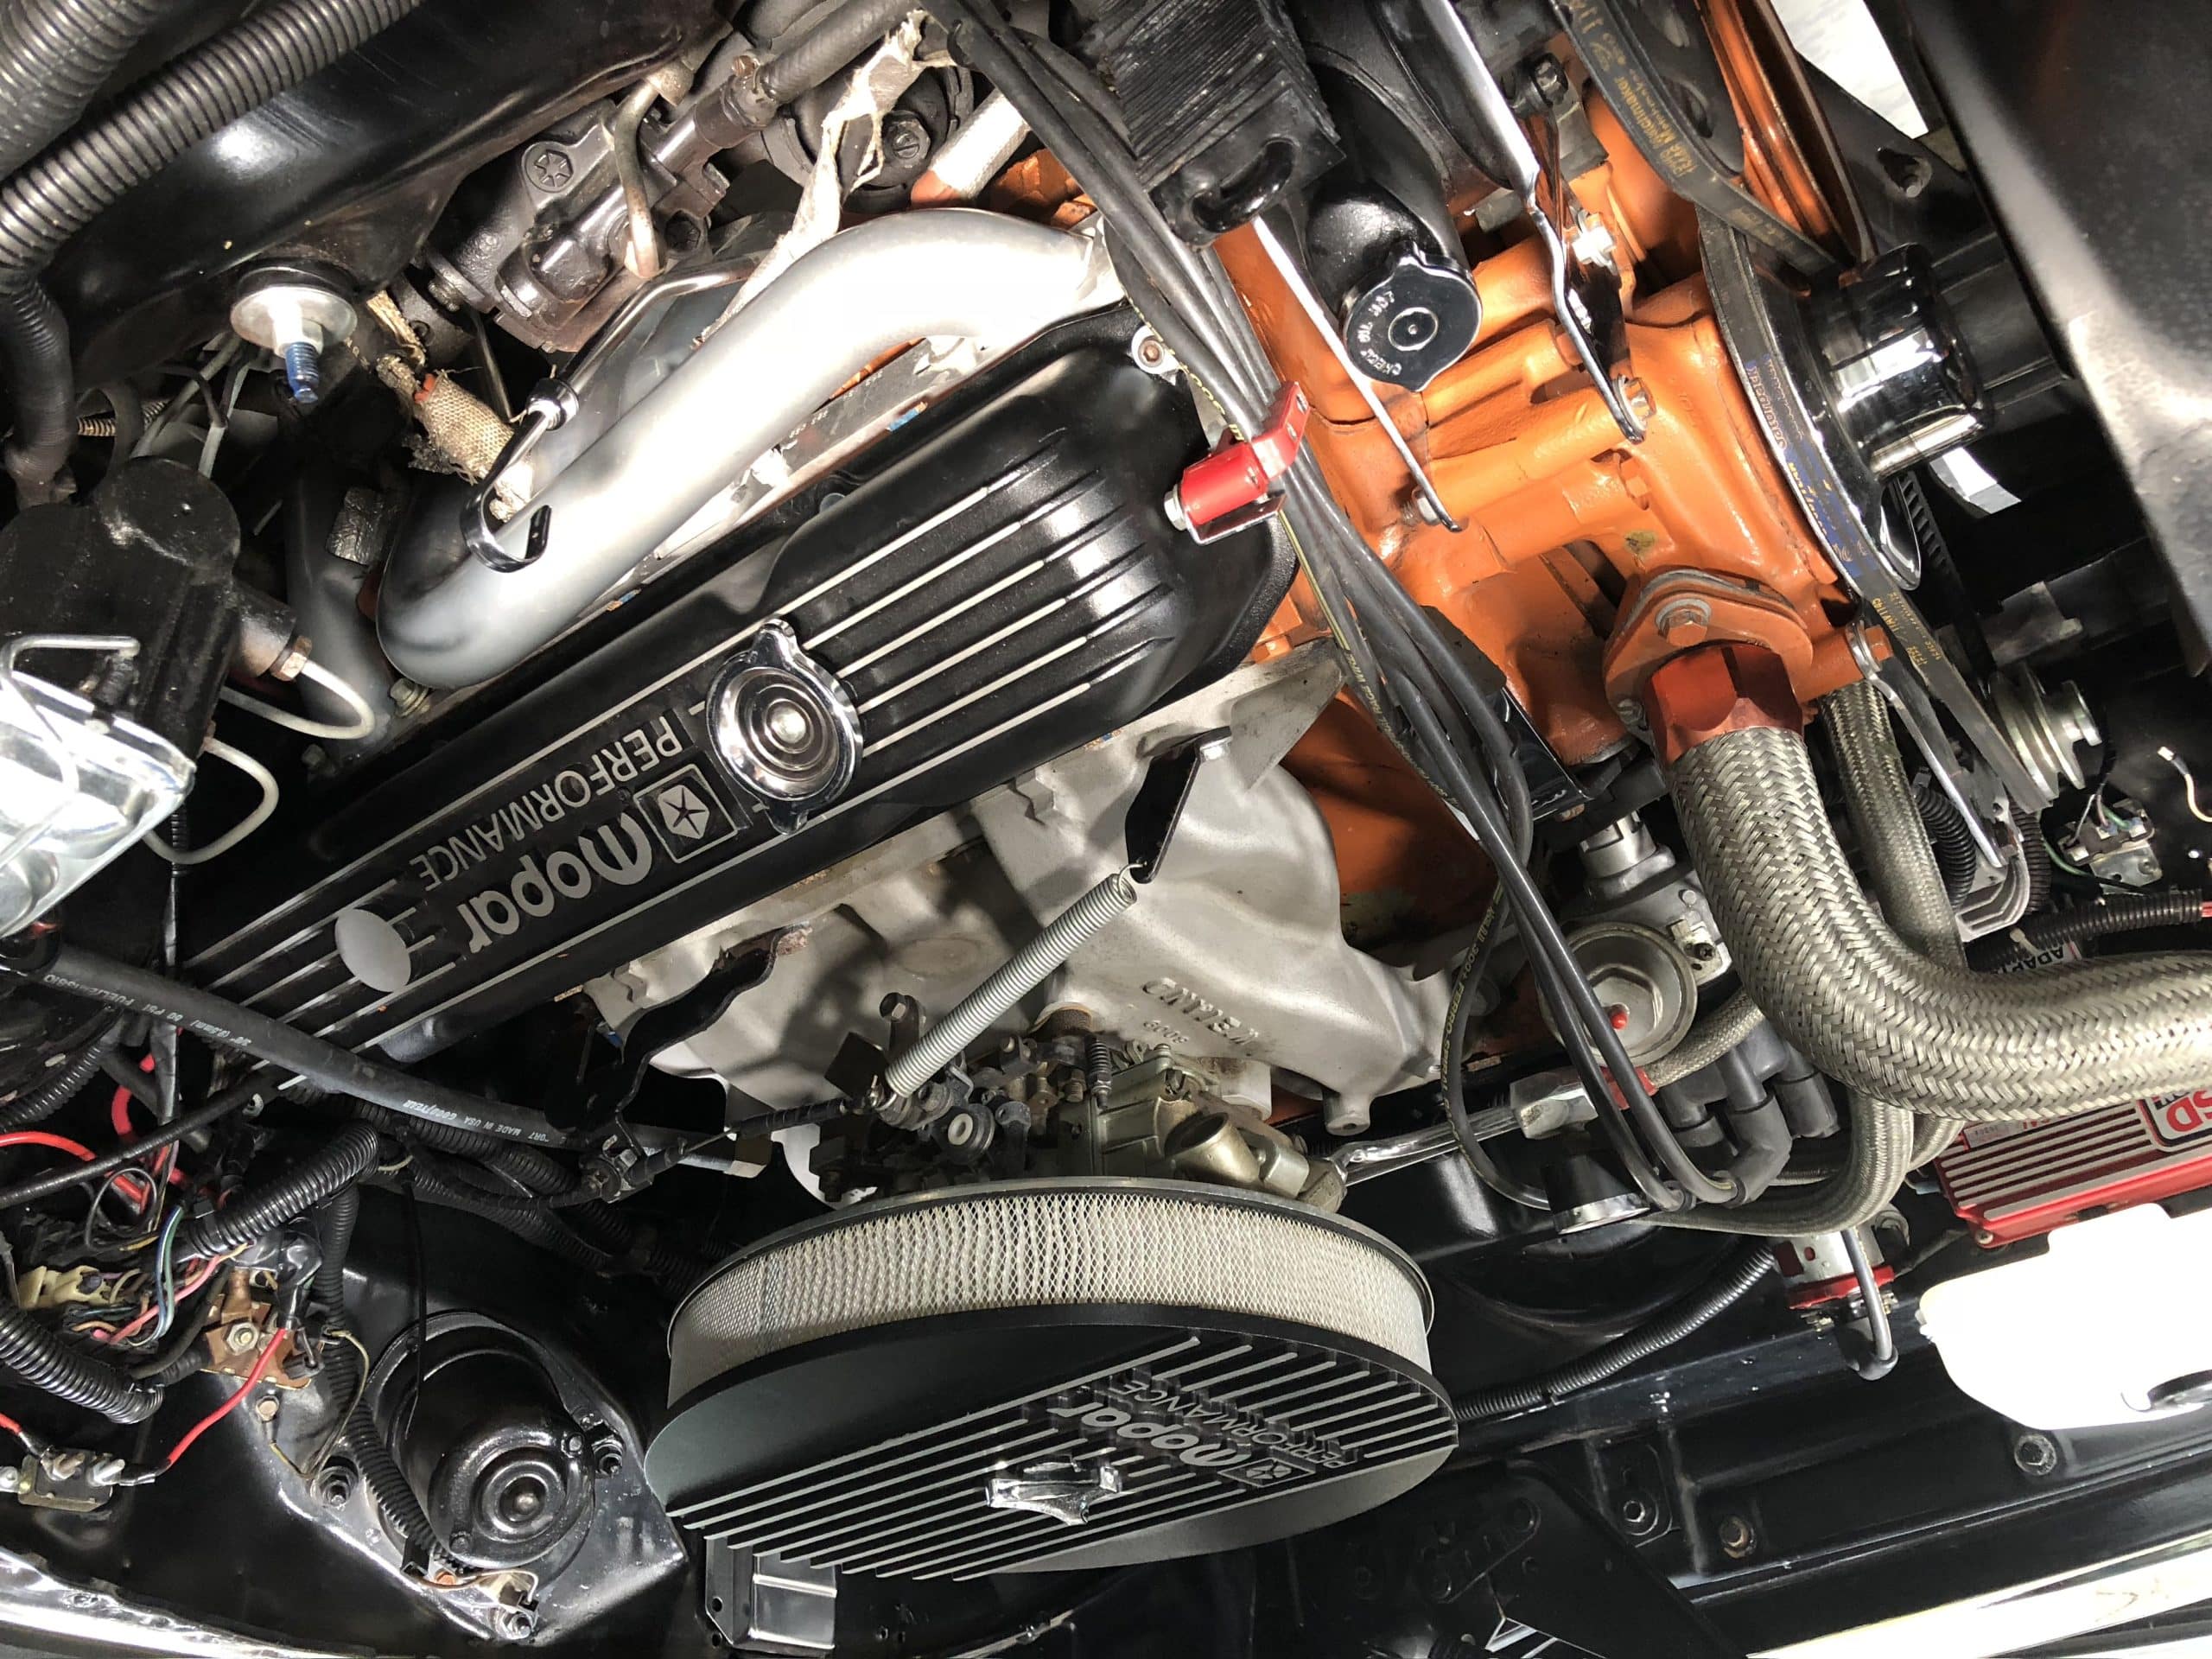 Mopar’s “Other” Big Block, The 440 Magnum, Is A Great Engine For Street Or Strip Duty.